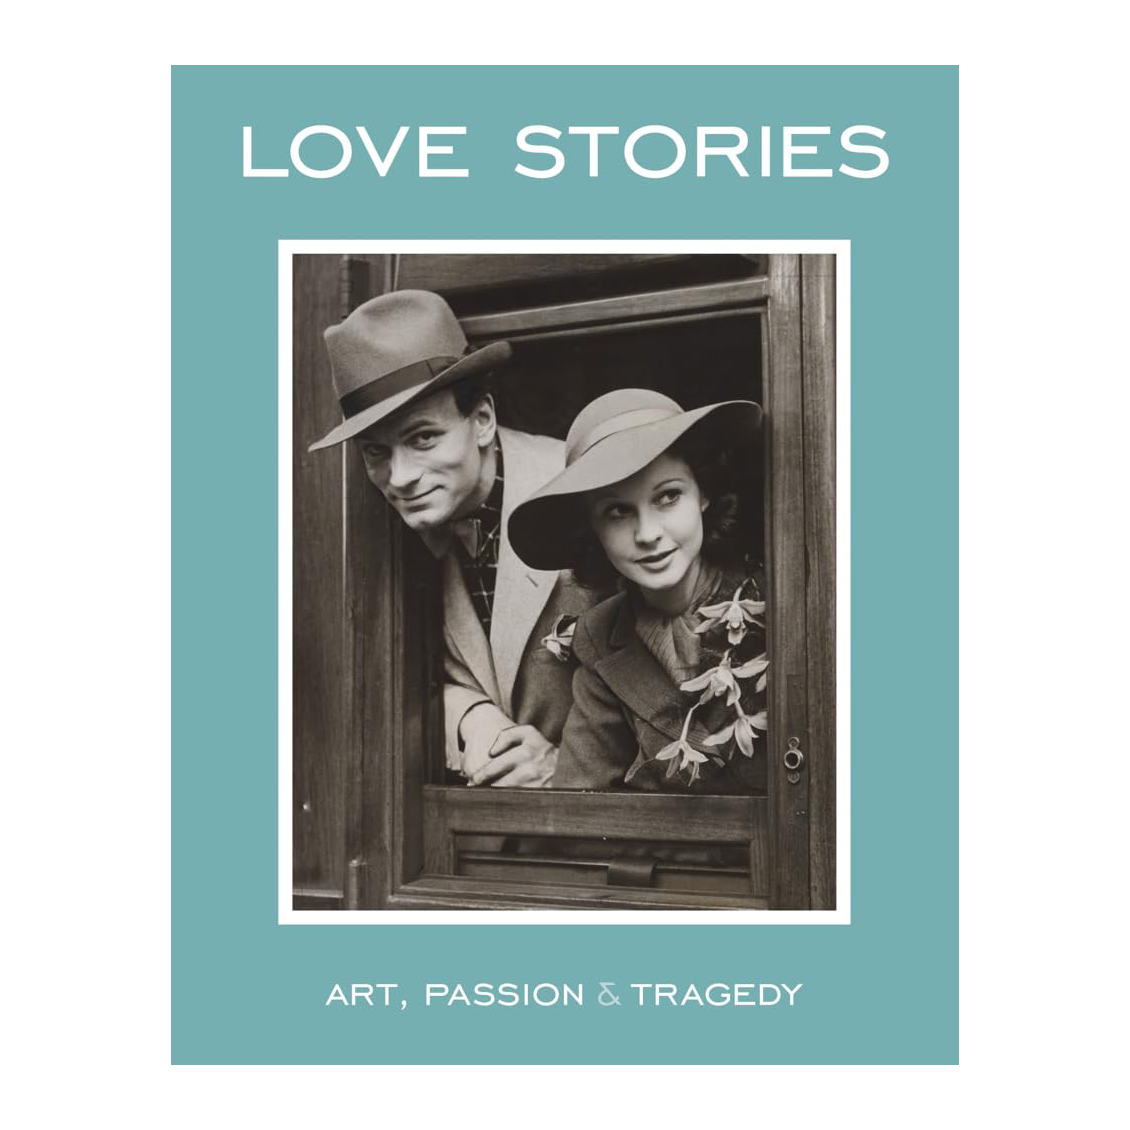 Love Stories: Art, Passion & Tragedy